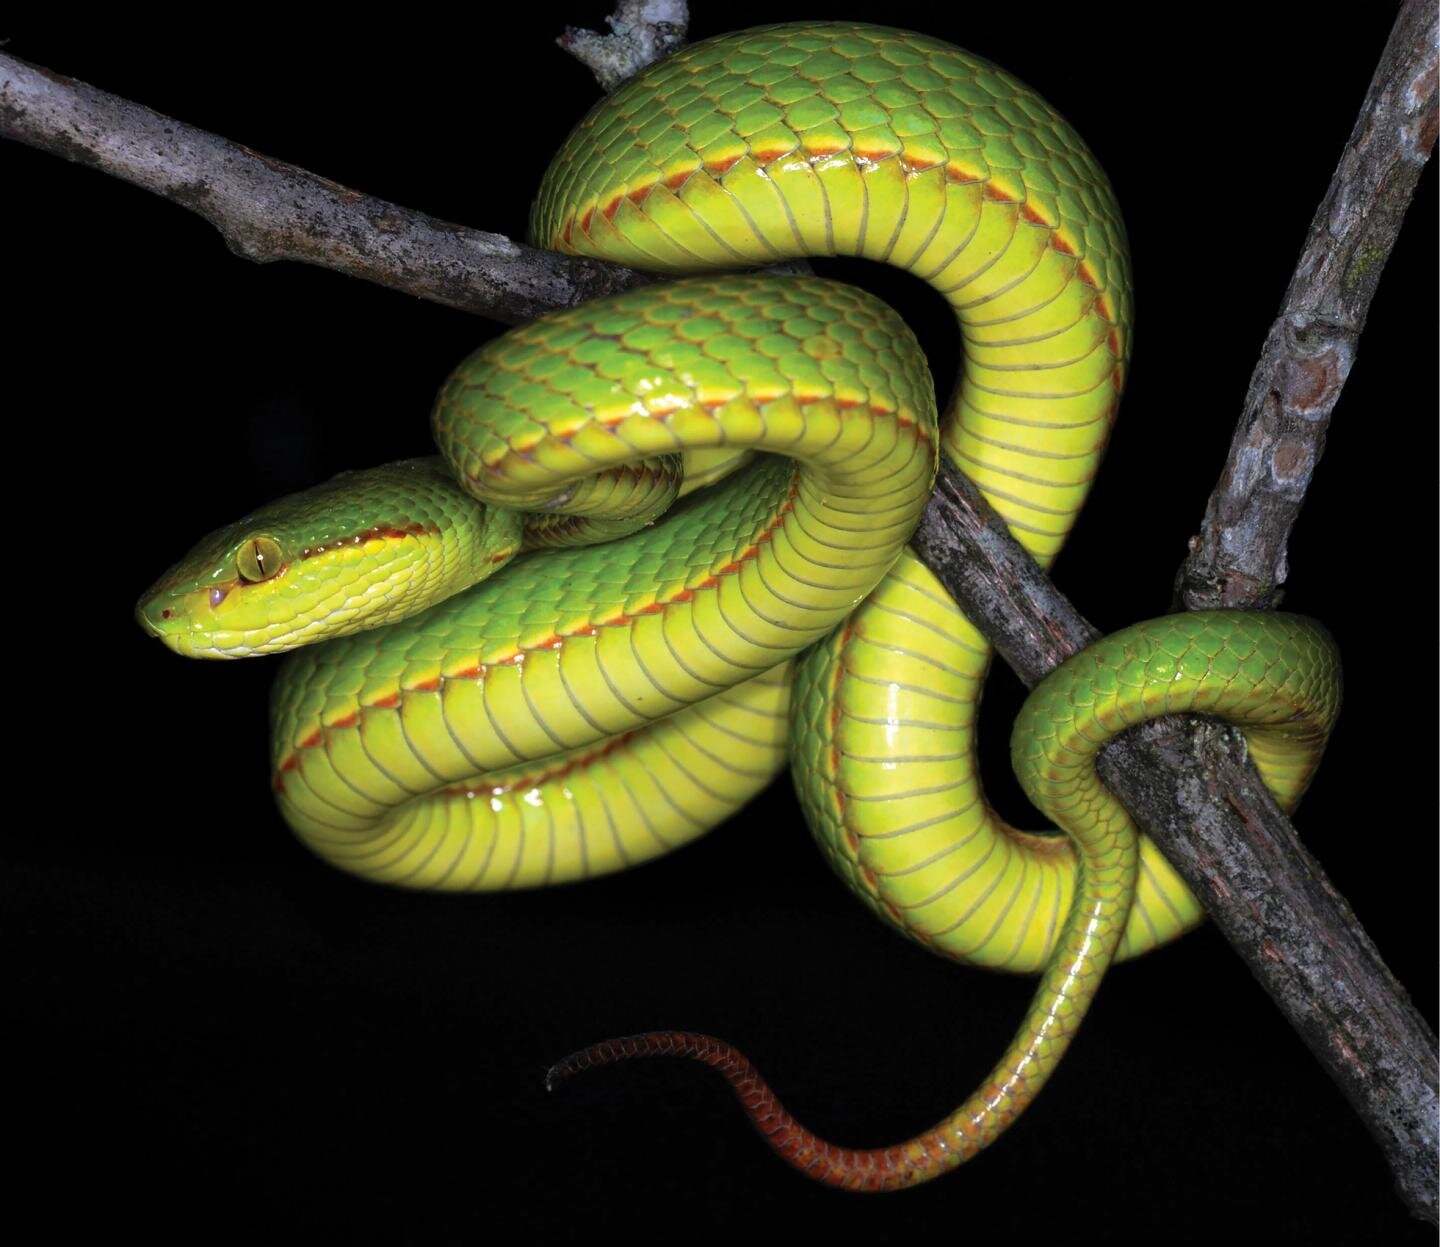 Welcome to the House of Slytherin: Salazar's pit viper, a new green pit  viper from India